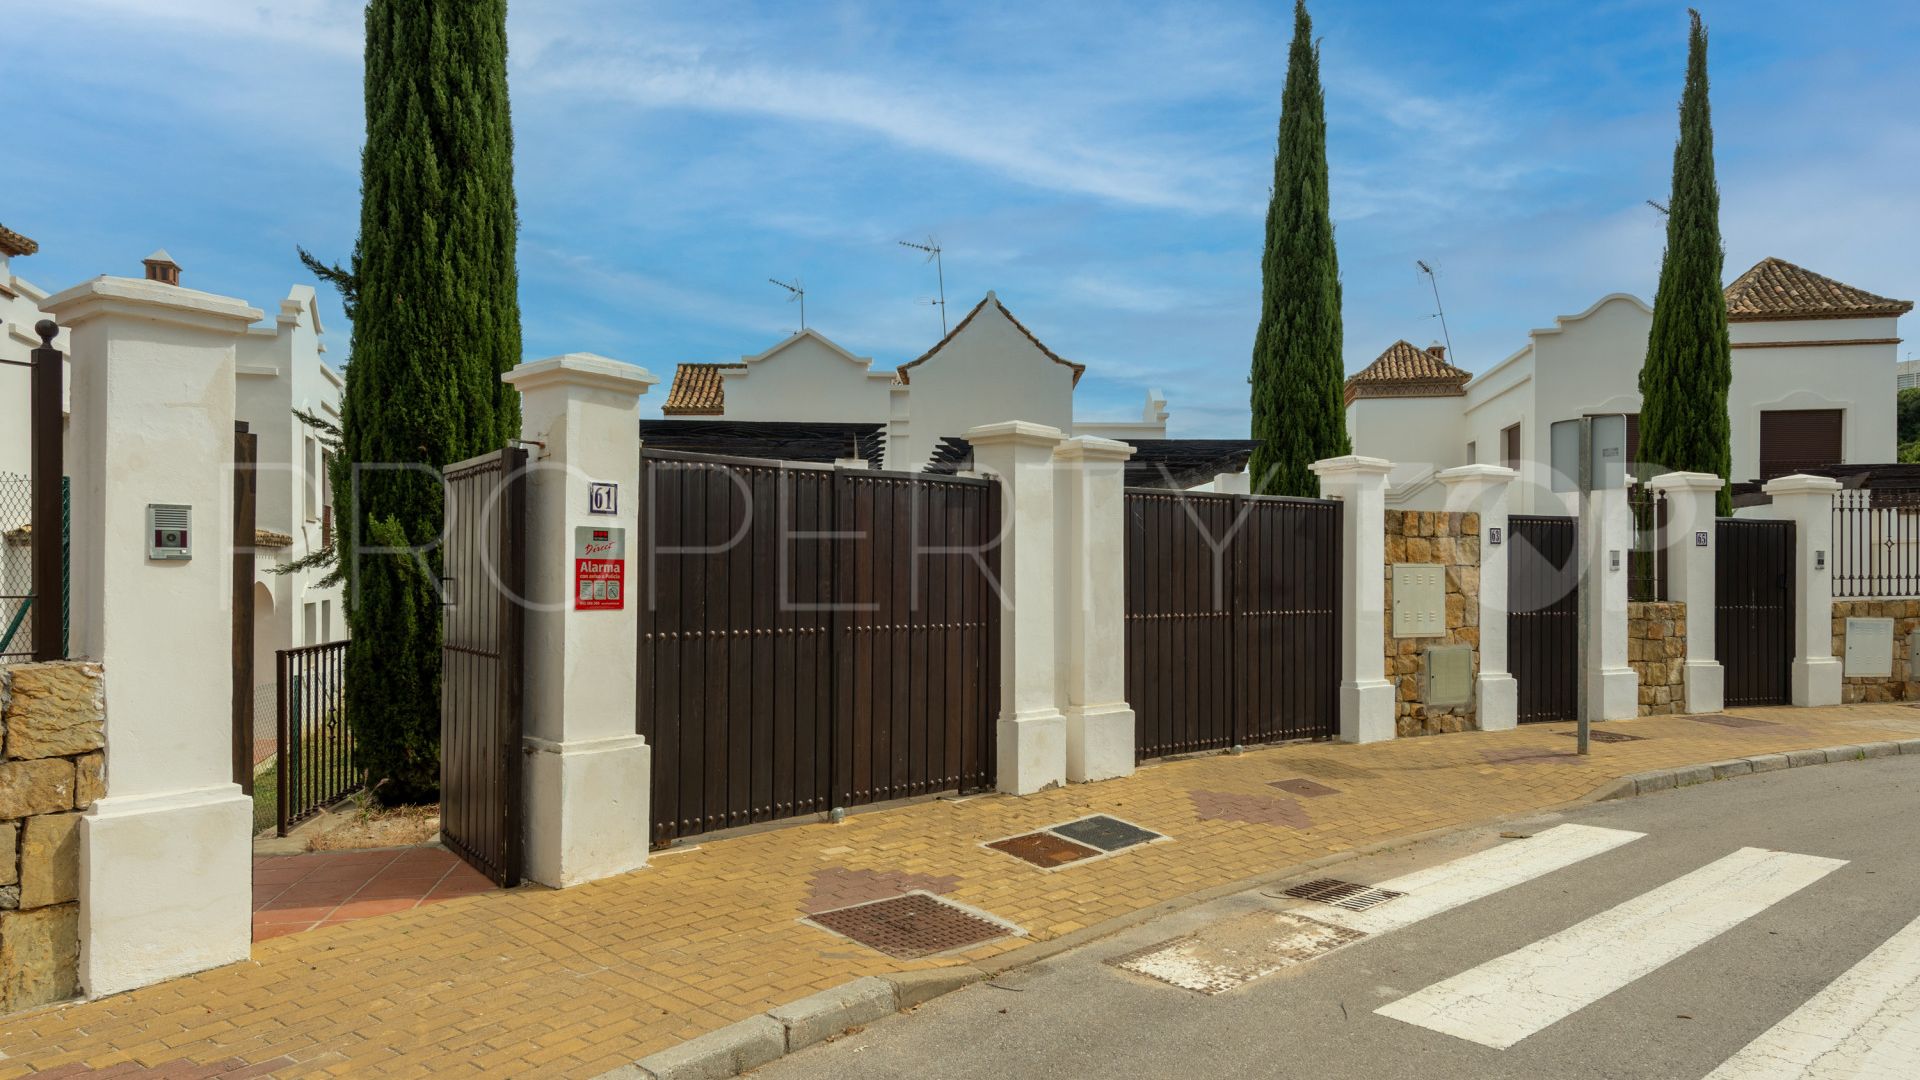 Buy Azata Golf semi detached house with 4 bedrooms